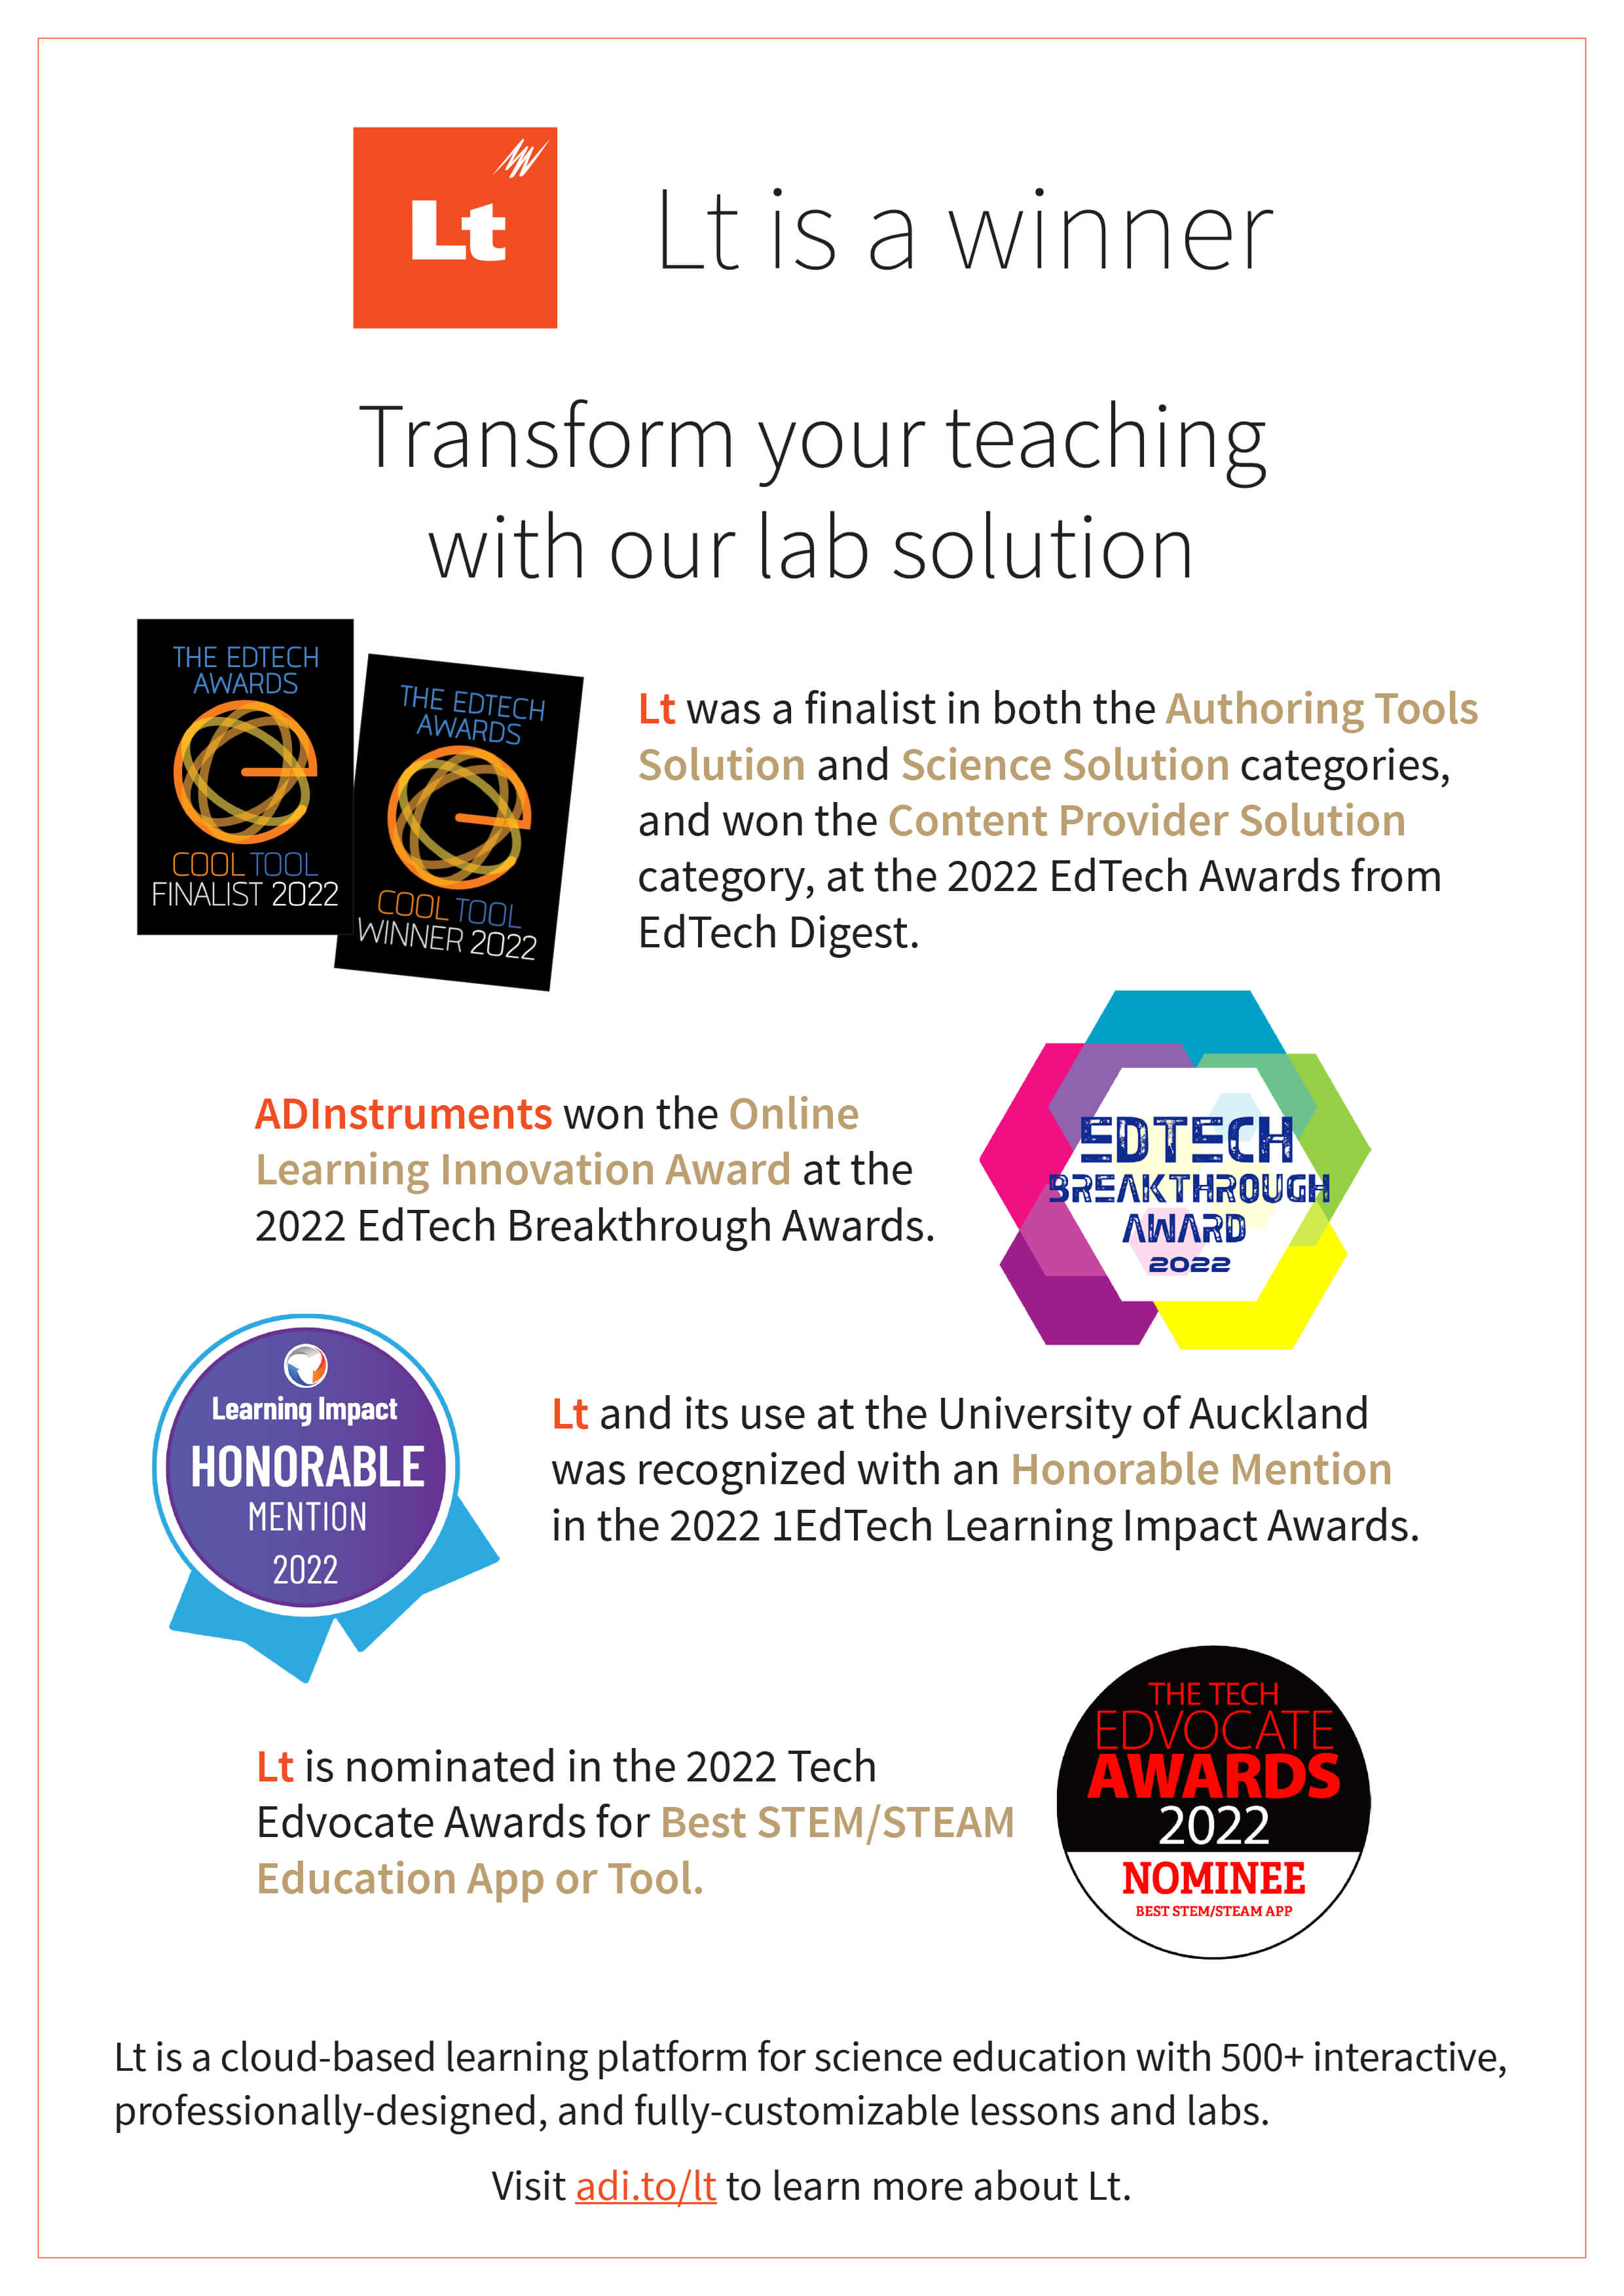 An A4 infographic with a white background. An orange 'Lt' logo and the text "Lt is a winner" sit at the top of the page. The subheading reads "Transform your teaching with our lab solution". Below, there are four badges or sets of badges. The first set of badges is for the EdTech Awards 2022. Two black badges sit next to the following text: "Lt was a finalist in both the Authoring Tools Solution and Science Solution categories, and won the Content Provider Solution category, at the 2022 EdTech Awards from EdTech Digest.". Below, the next badge is a multi-colored EdTech Breakthrough Award badge for 2022, and sits next to the text: "ADInstruments won the Online Learning Innovation Award at the 2022 EdTech Breakthrough Awards.". Below, the third badge is a blue and purple Learning Impact Honorable Mention badge for 2022, and sits next to the text: "Lt and its use at the University of Auckland was recognized with an Honorable Mention in the 2022 1EdTech Learning Impact Awards.". The final badge, below, is a black, white, and red nominee badge from The Tech Edvocate Awards 2022. This badge sits next to the text: "Lt is nominated in the 2022 Tech Edvocate Awards for Best STEM/STEAM Education App or Tool.". At the bottom of the overall infographic, there is the text: "Lt is a cloud-based learning platform for science education with 500+ interactive, professionally-designed, and fully-customizable lessons and labs. Visit adi.to/lt to learn more about Lt.". 